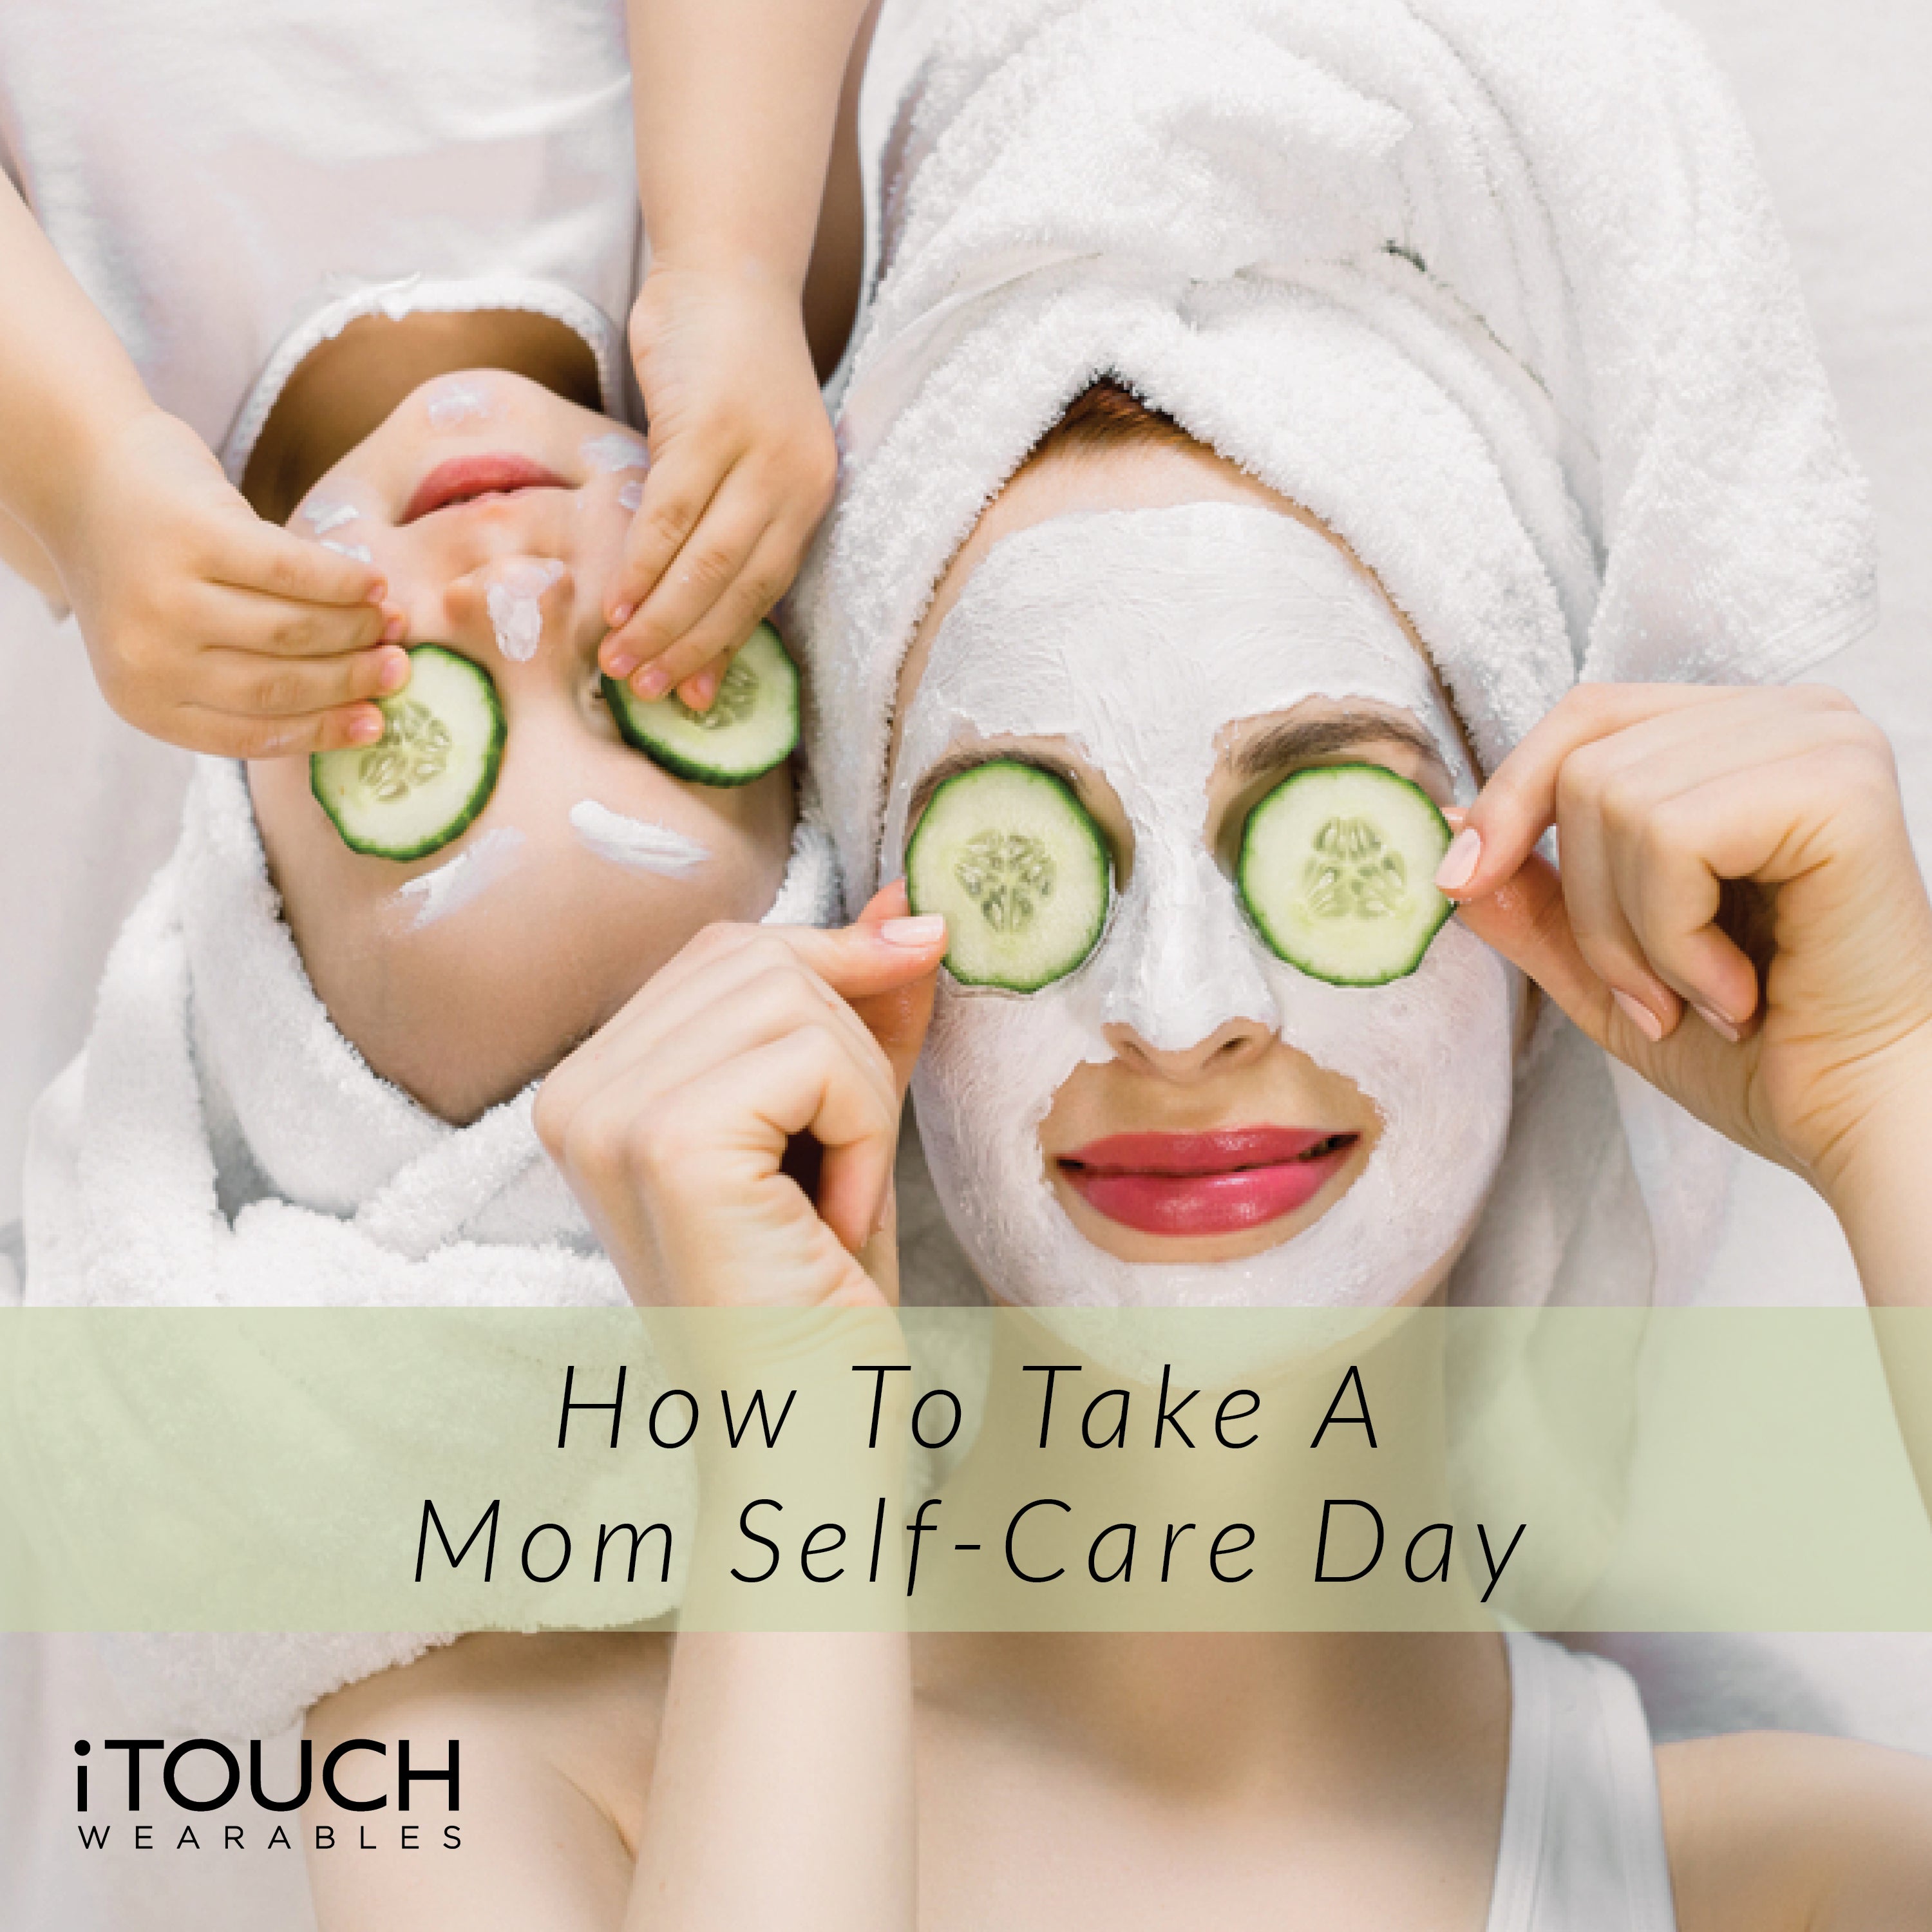 How To Take A Mom Self-Care Day